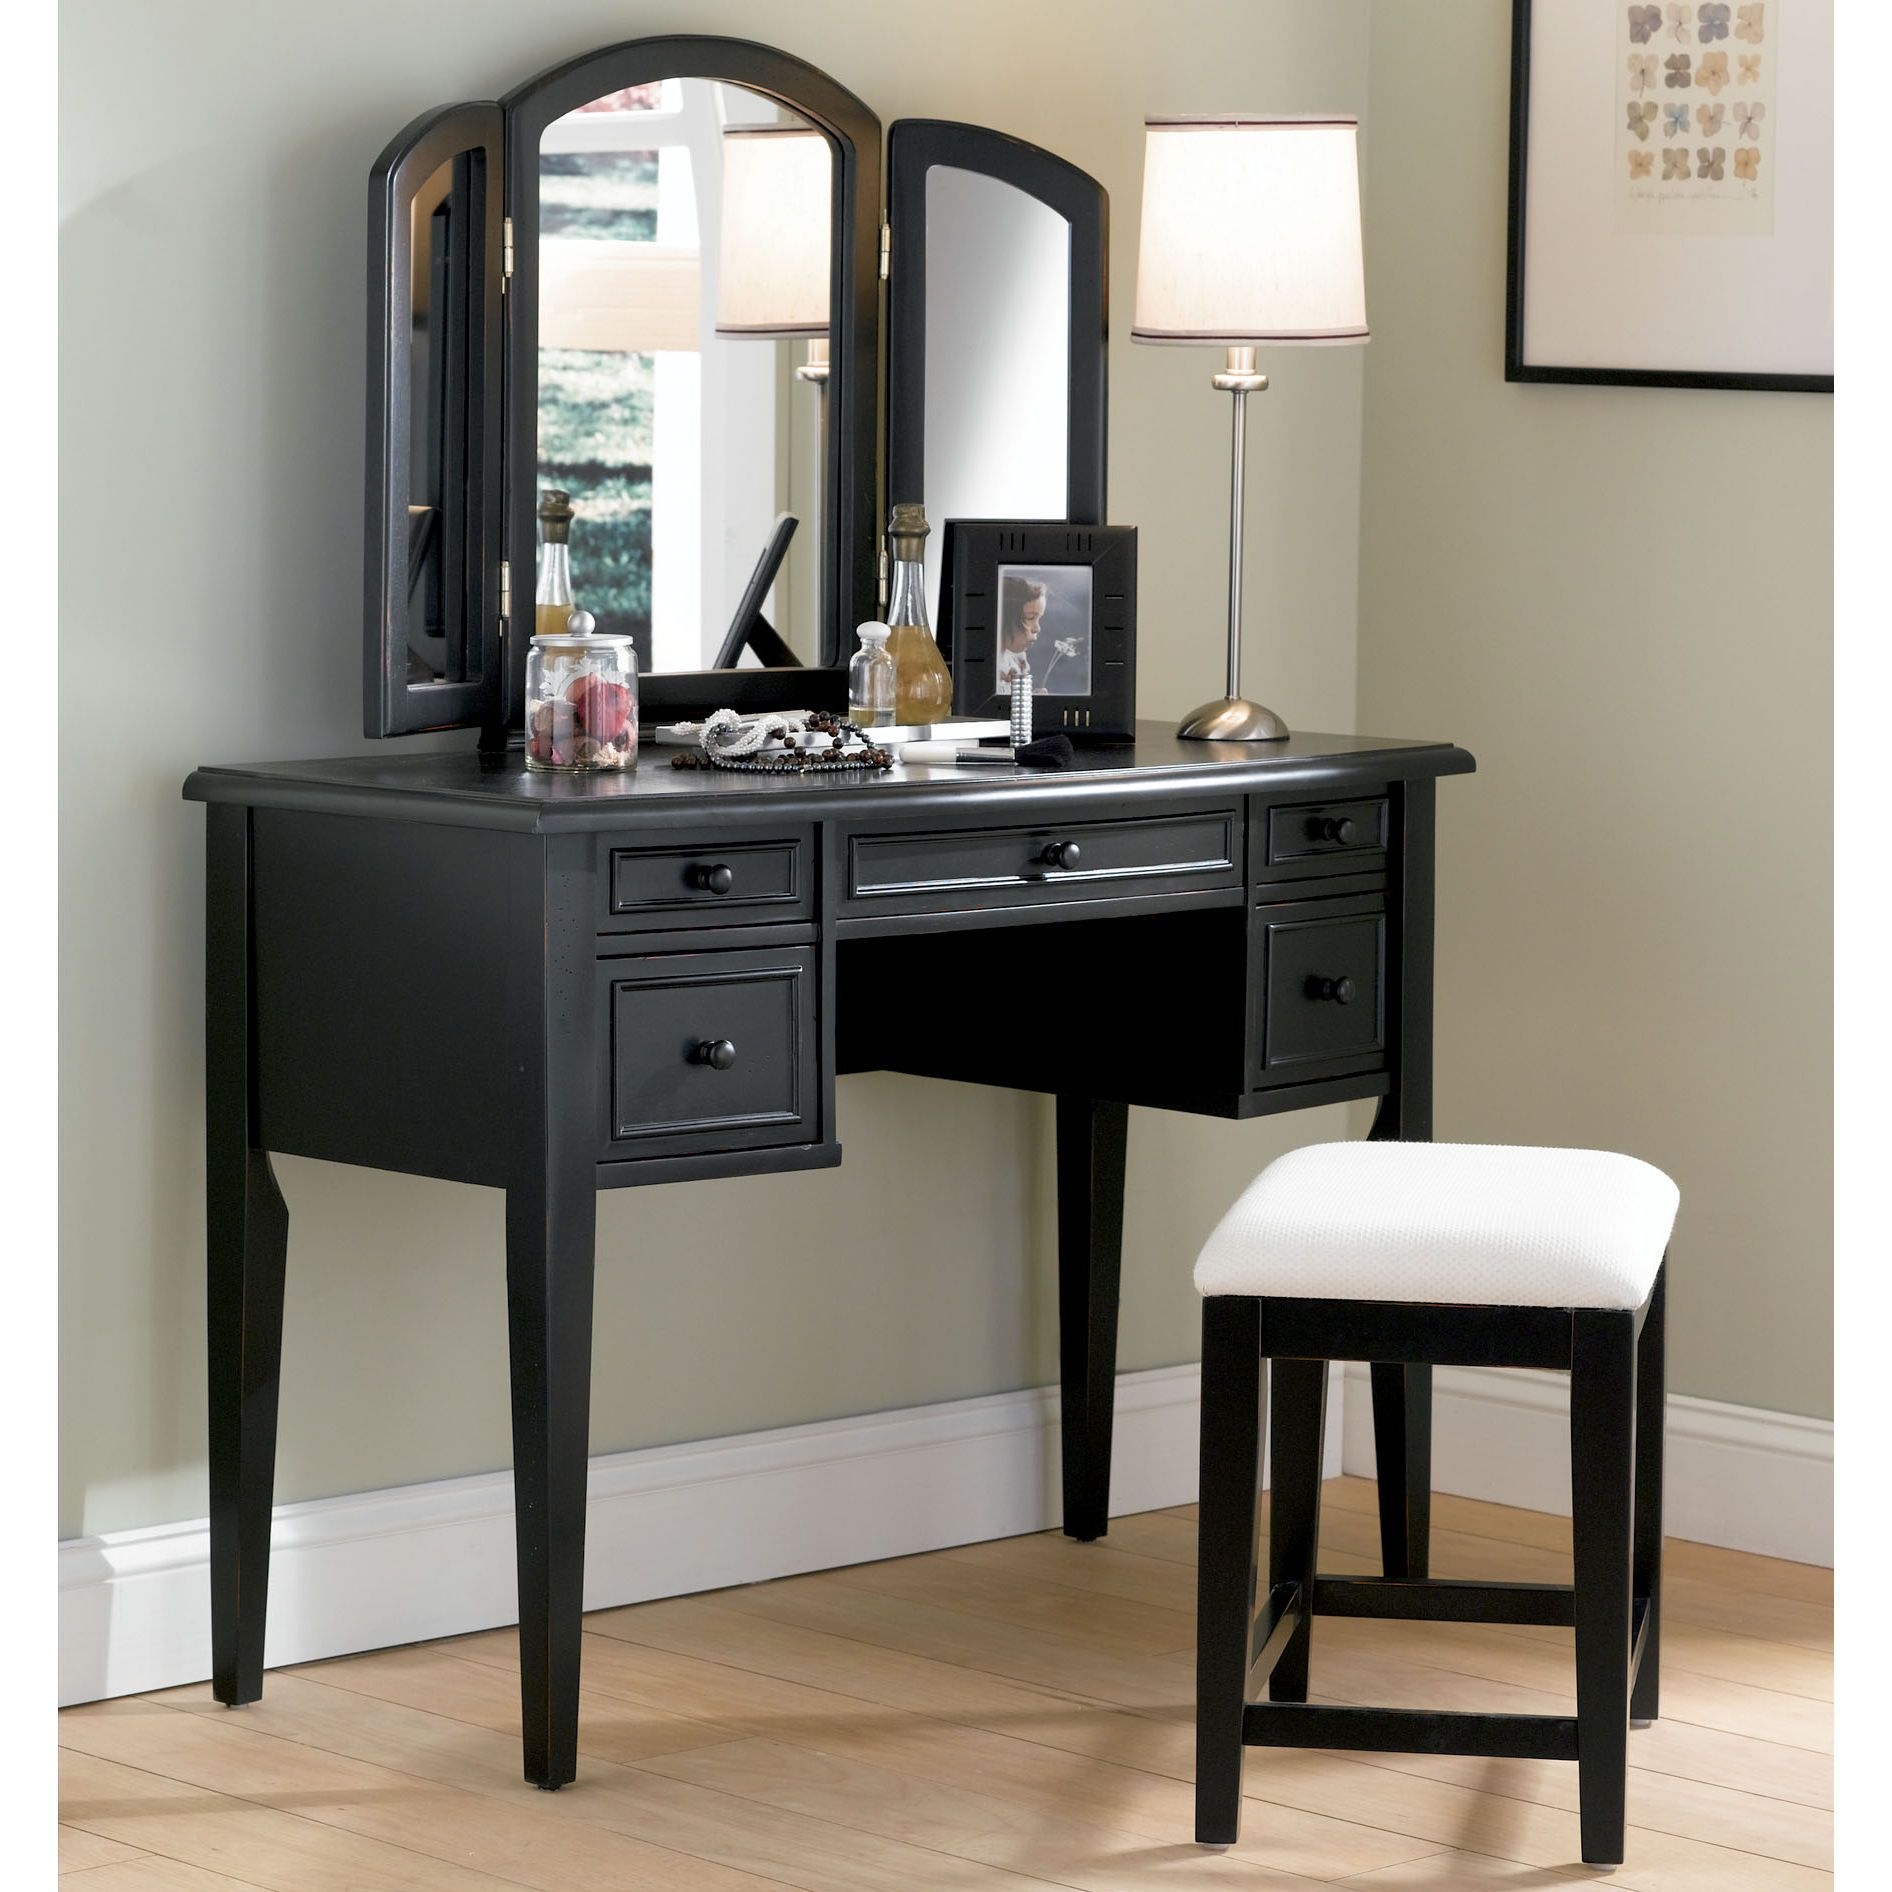 Antiqued black vanity from powell furniture